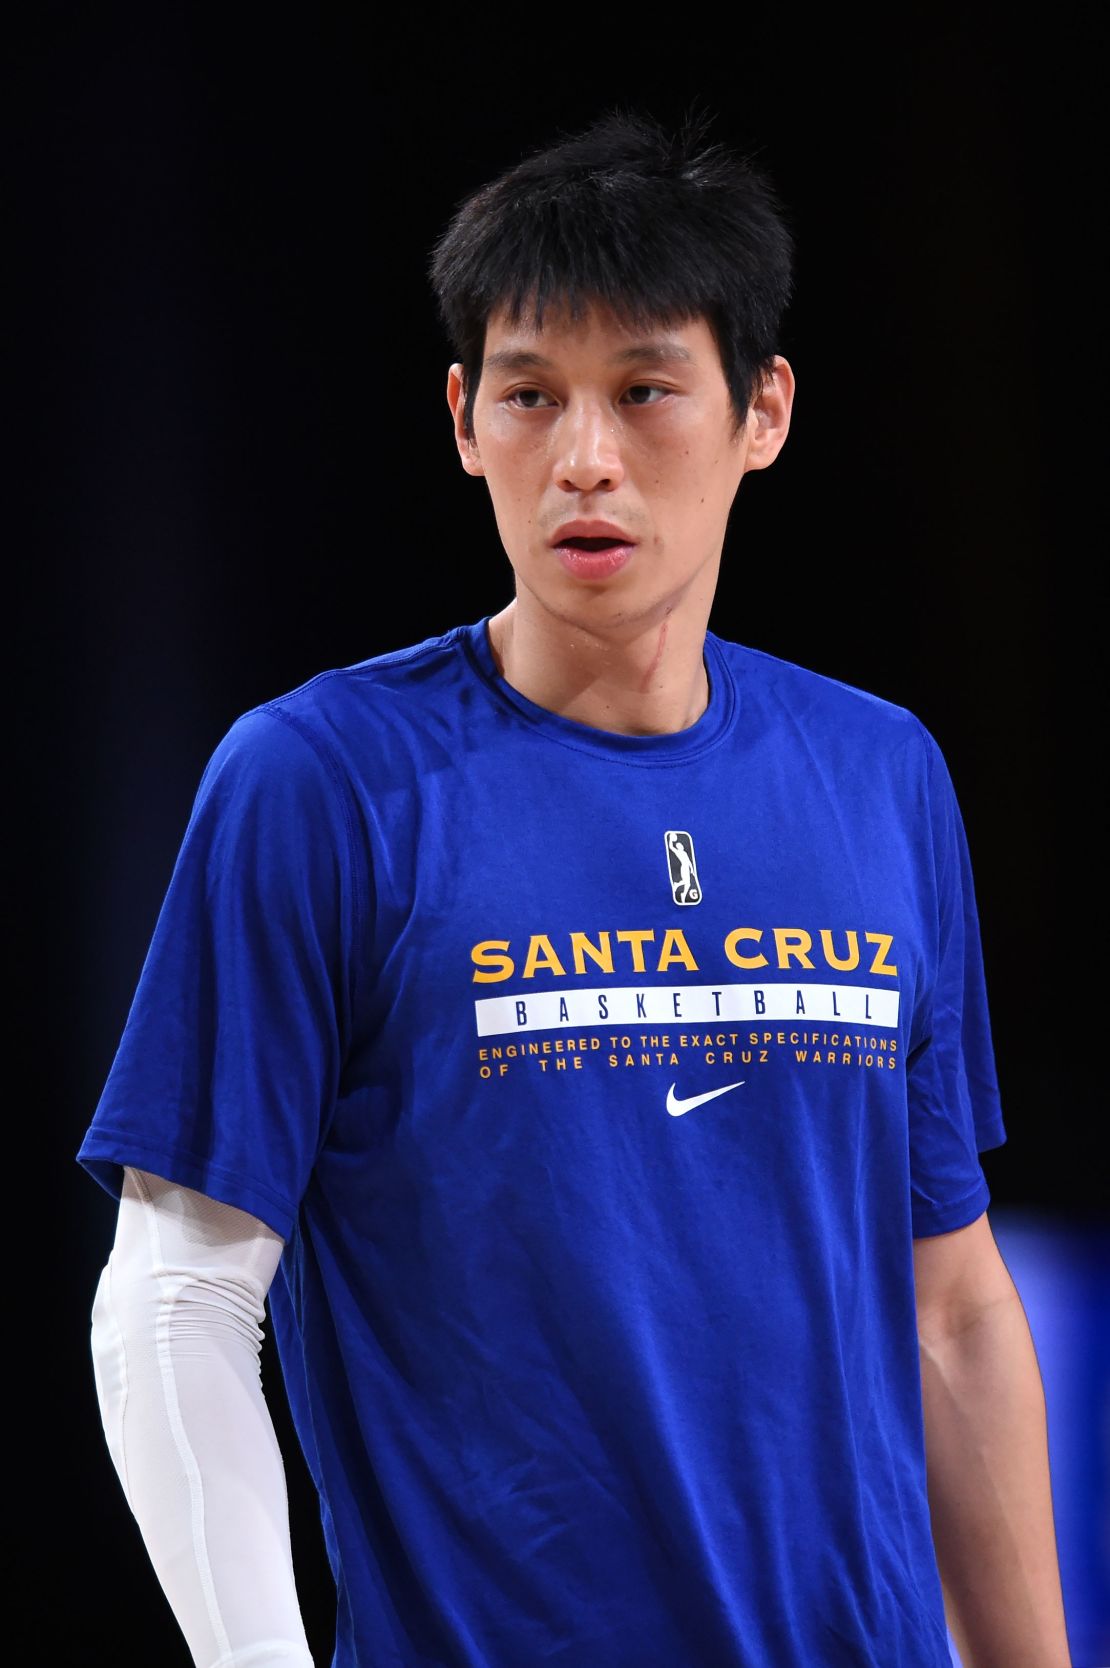 Lin currently plays for the Santa Cruz Warriors in the NBA G League.